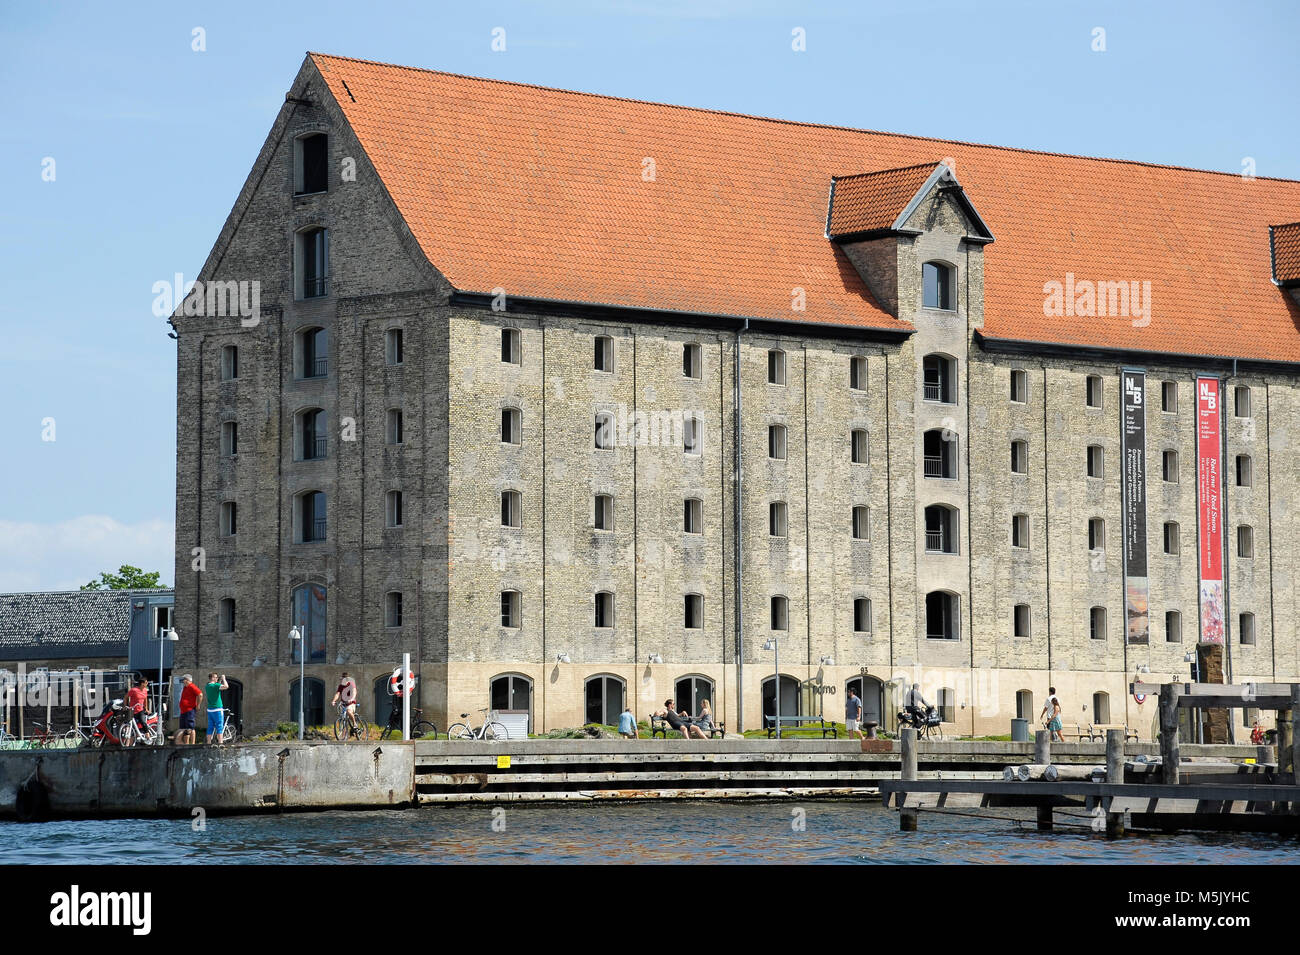 Nordatlantens Brygge (North Atlantic House) in old warehouse from XVIII century was Greenlandic Trading Square for 200 years, and now hosts cultural c Stock Photo